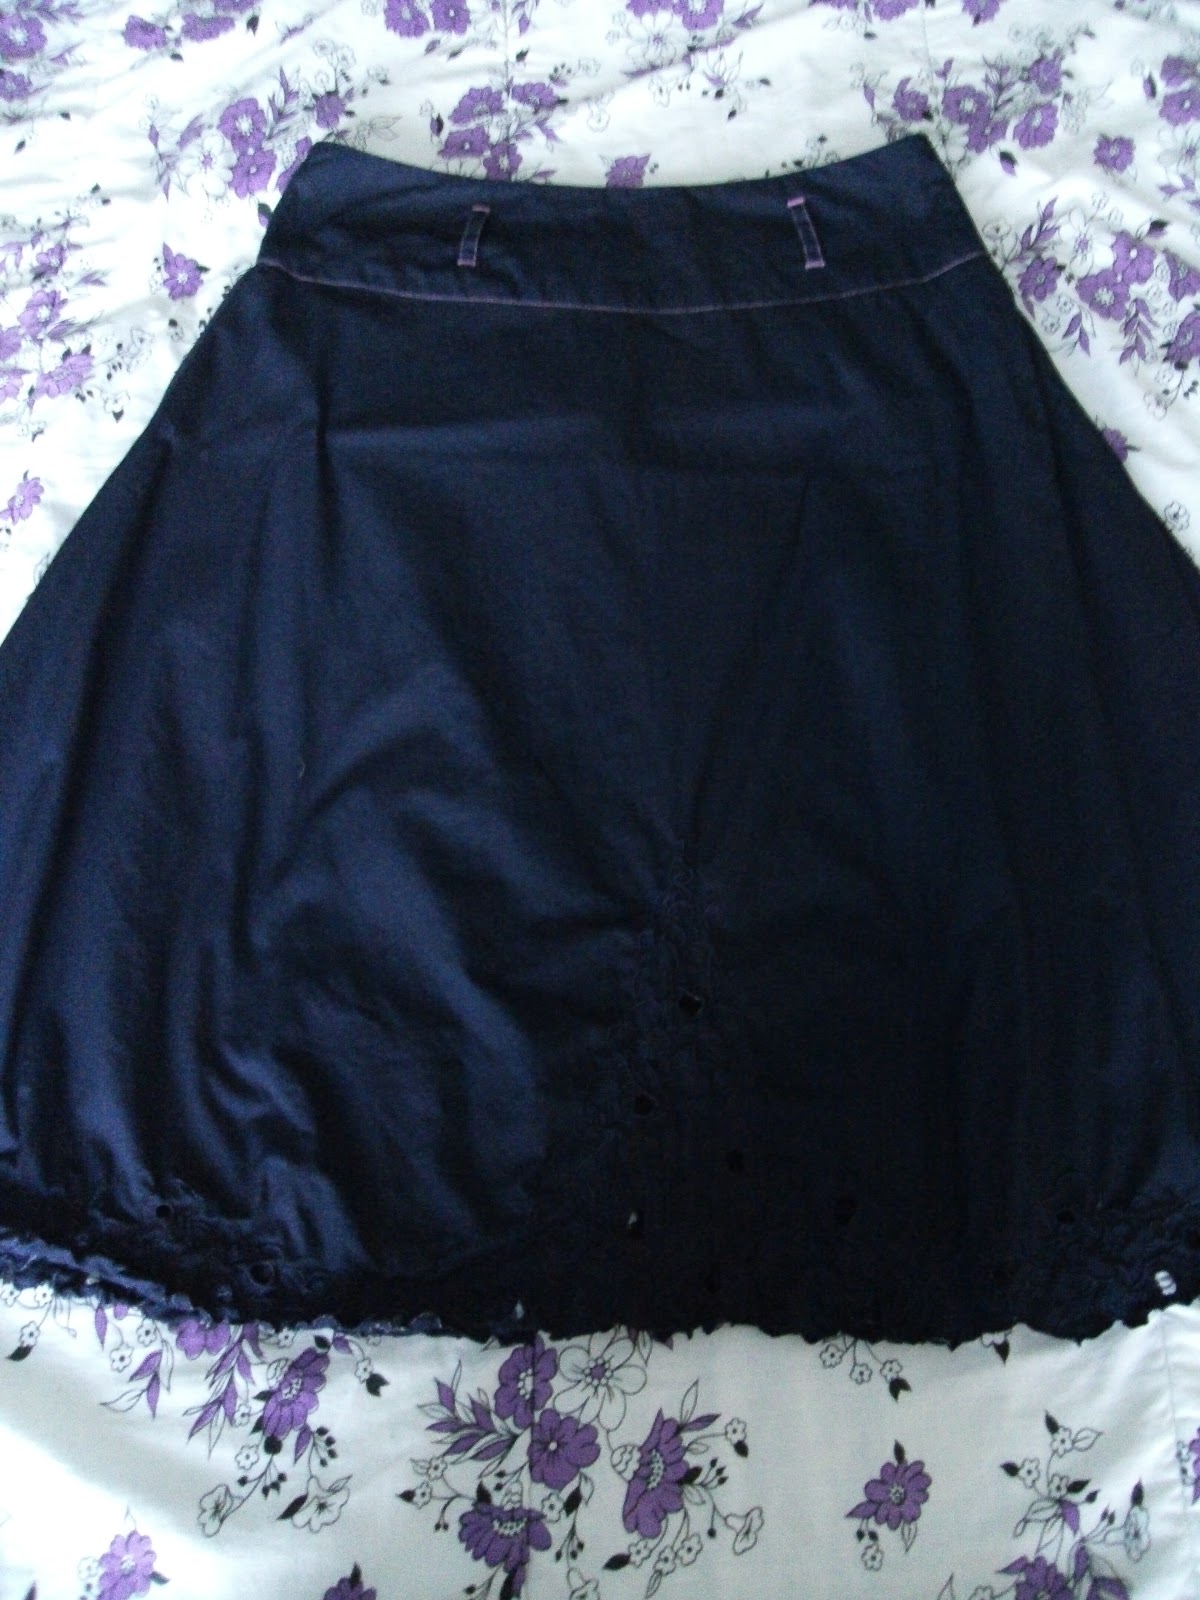 Refashion Co-op: Ugly pink skirt to sweet navy wrap!